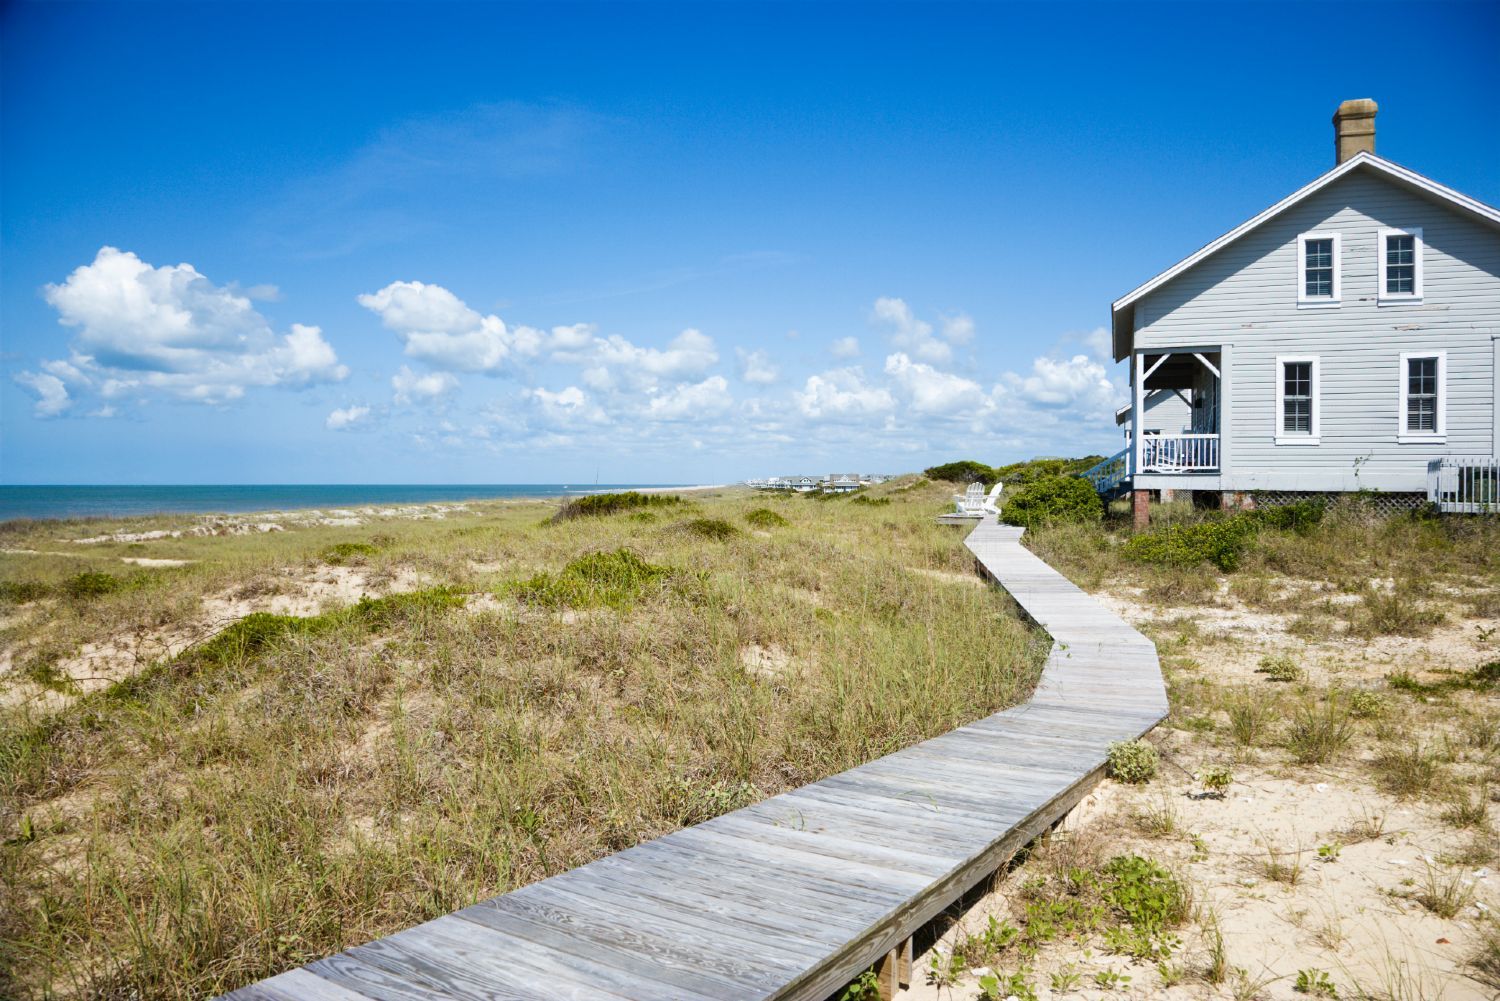 House with wooden walkway near waterfront - cottages.com